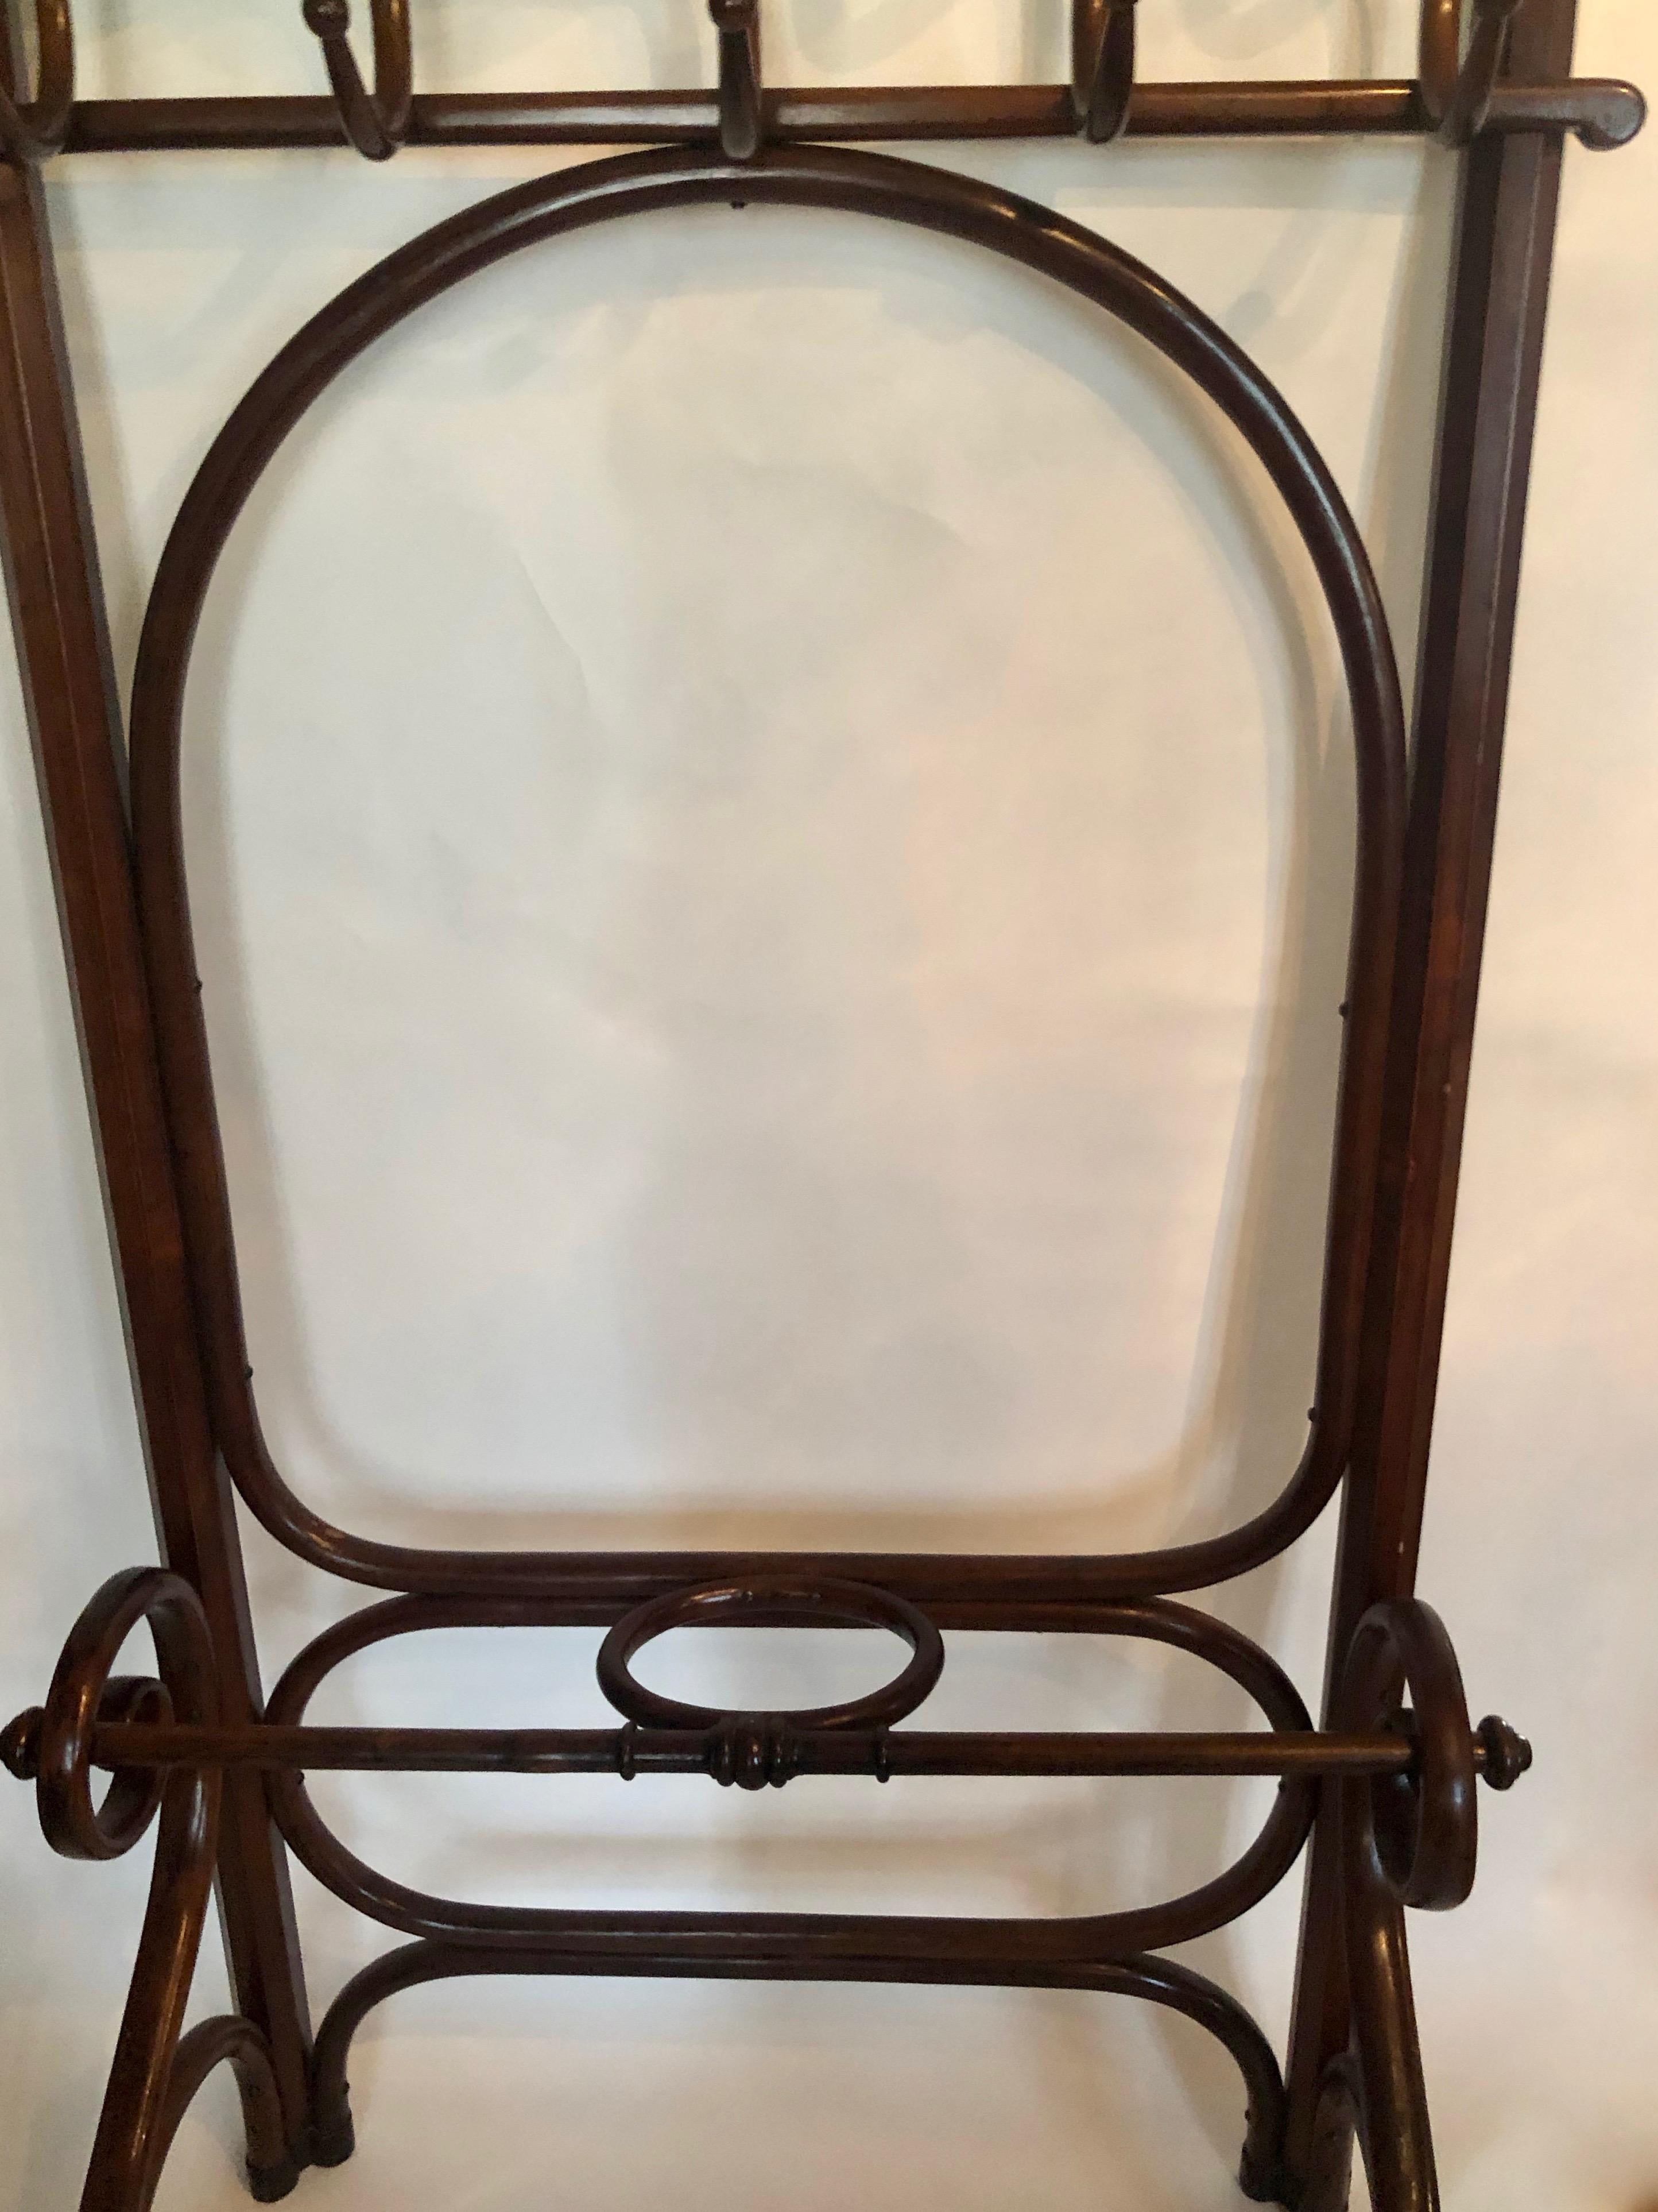 Free standing wardrobe from the Gebrüder Thonet, Wien produced around 1900 . Made from bent beech wood and then stained in a dark colour.
There are five elegantly curved coat hooks that have a double curve for coat and hat; below is a space for